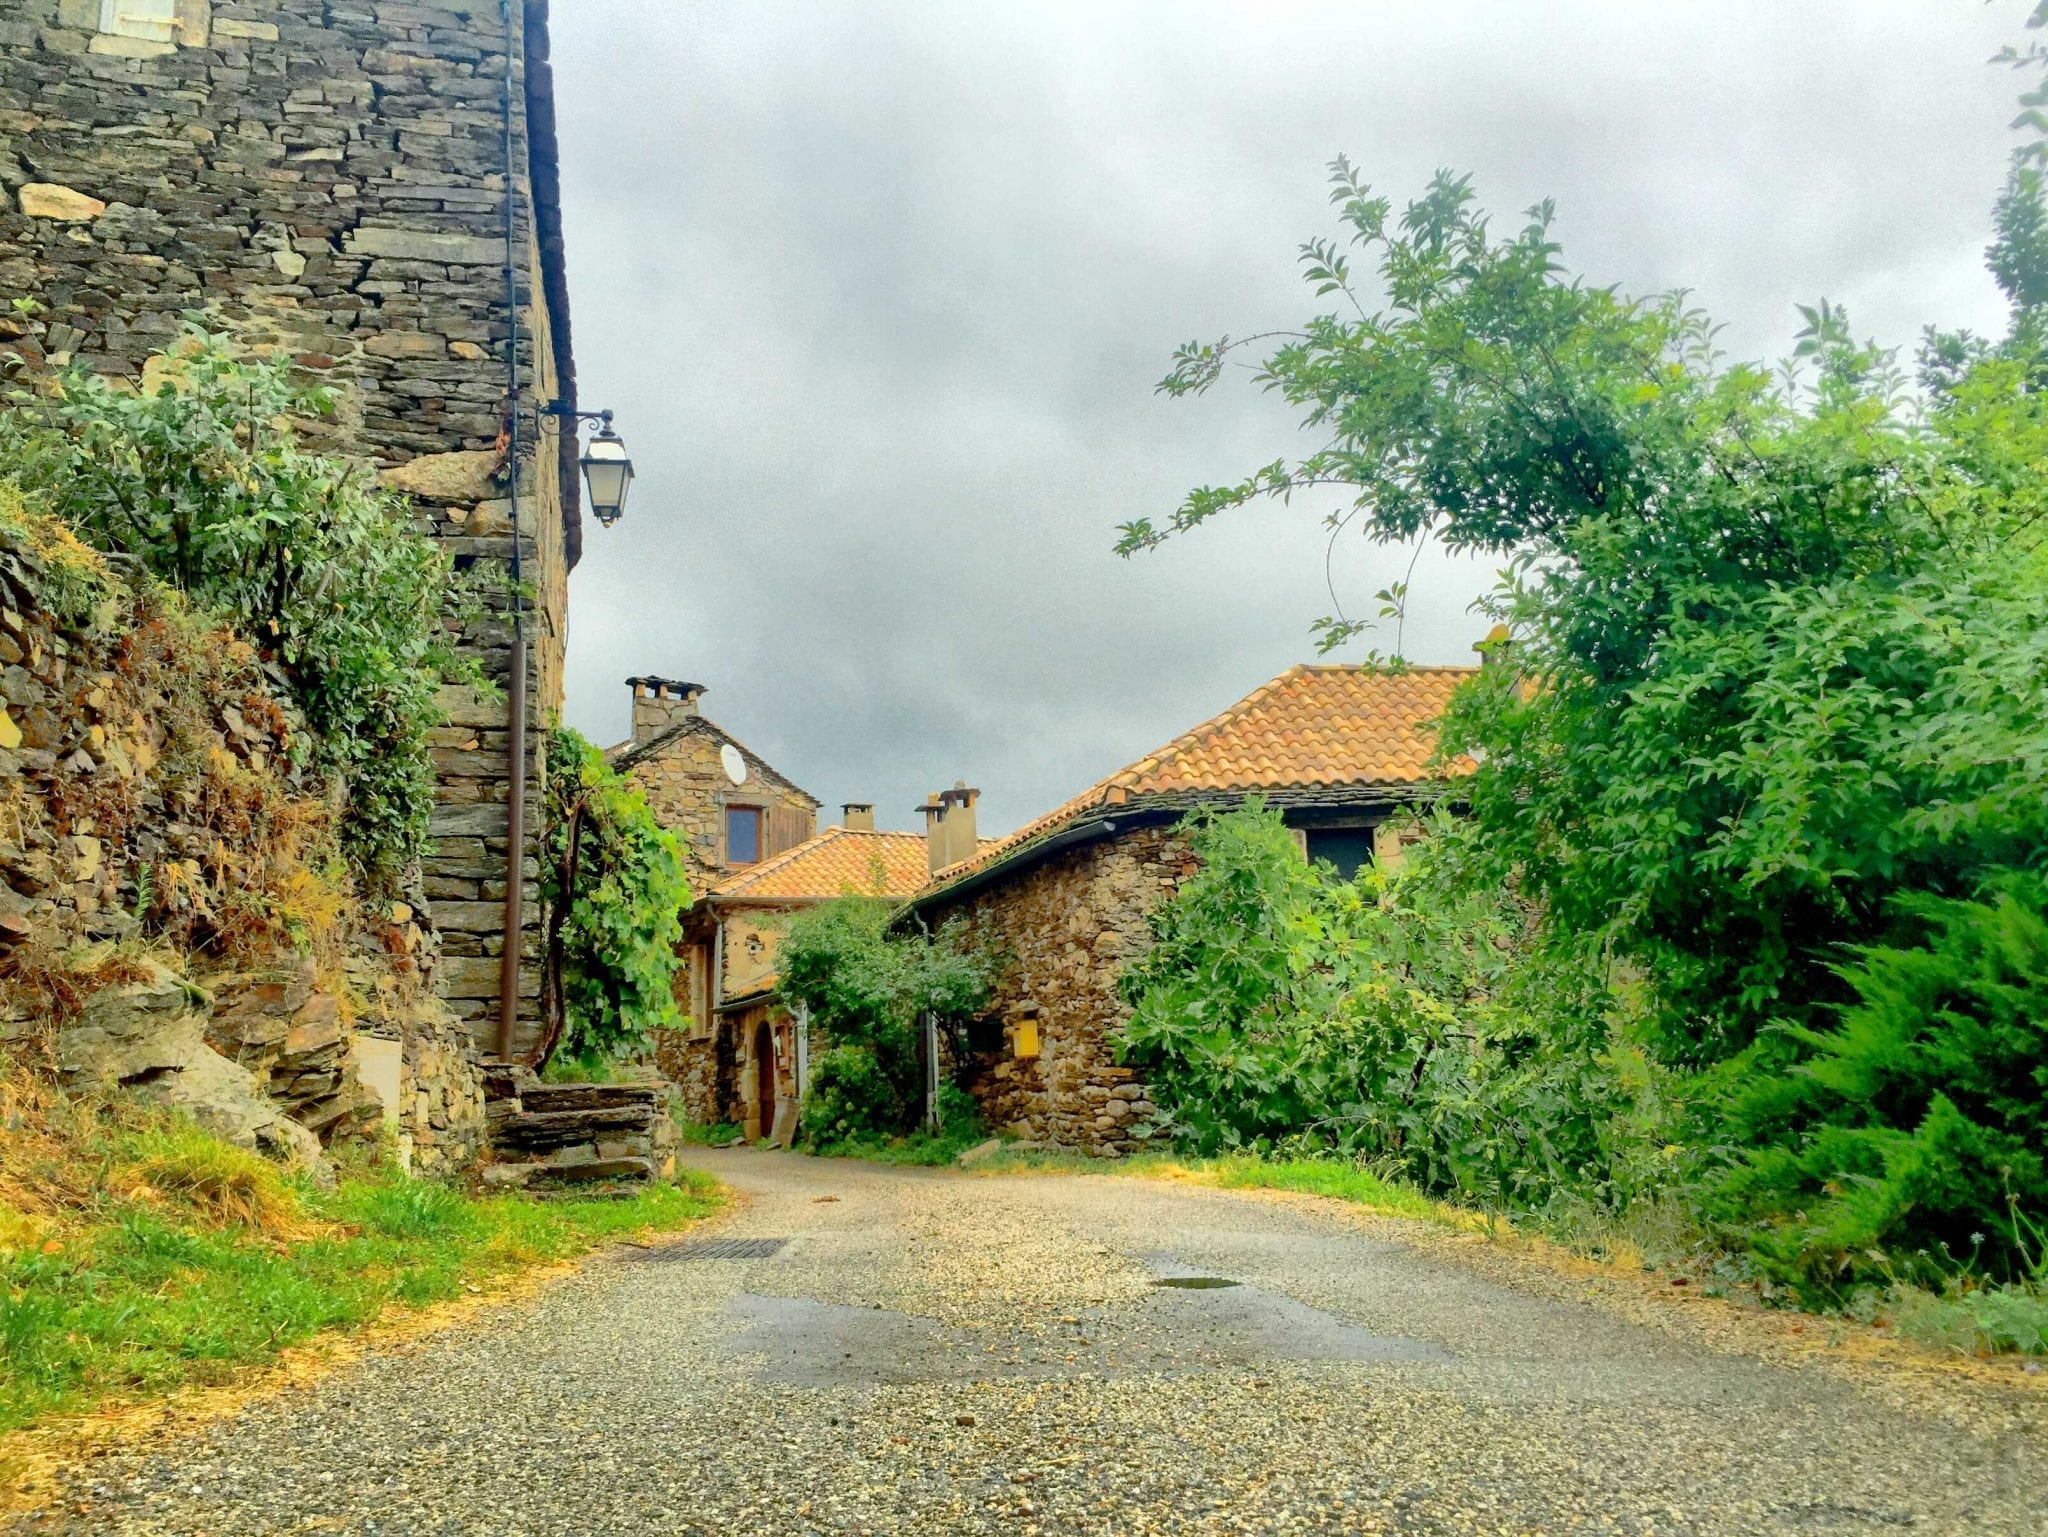 A stone road leading to an old stone house, featuring Sterling and Jay from Internet Business Mastery.